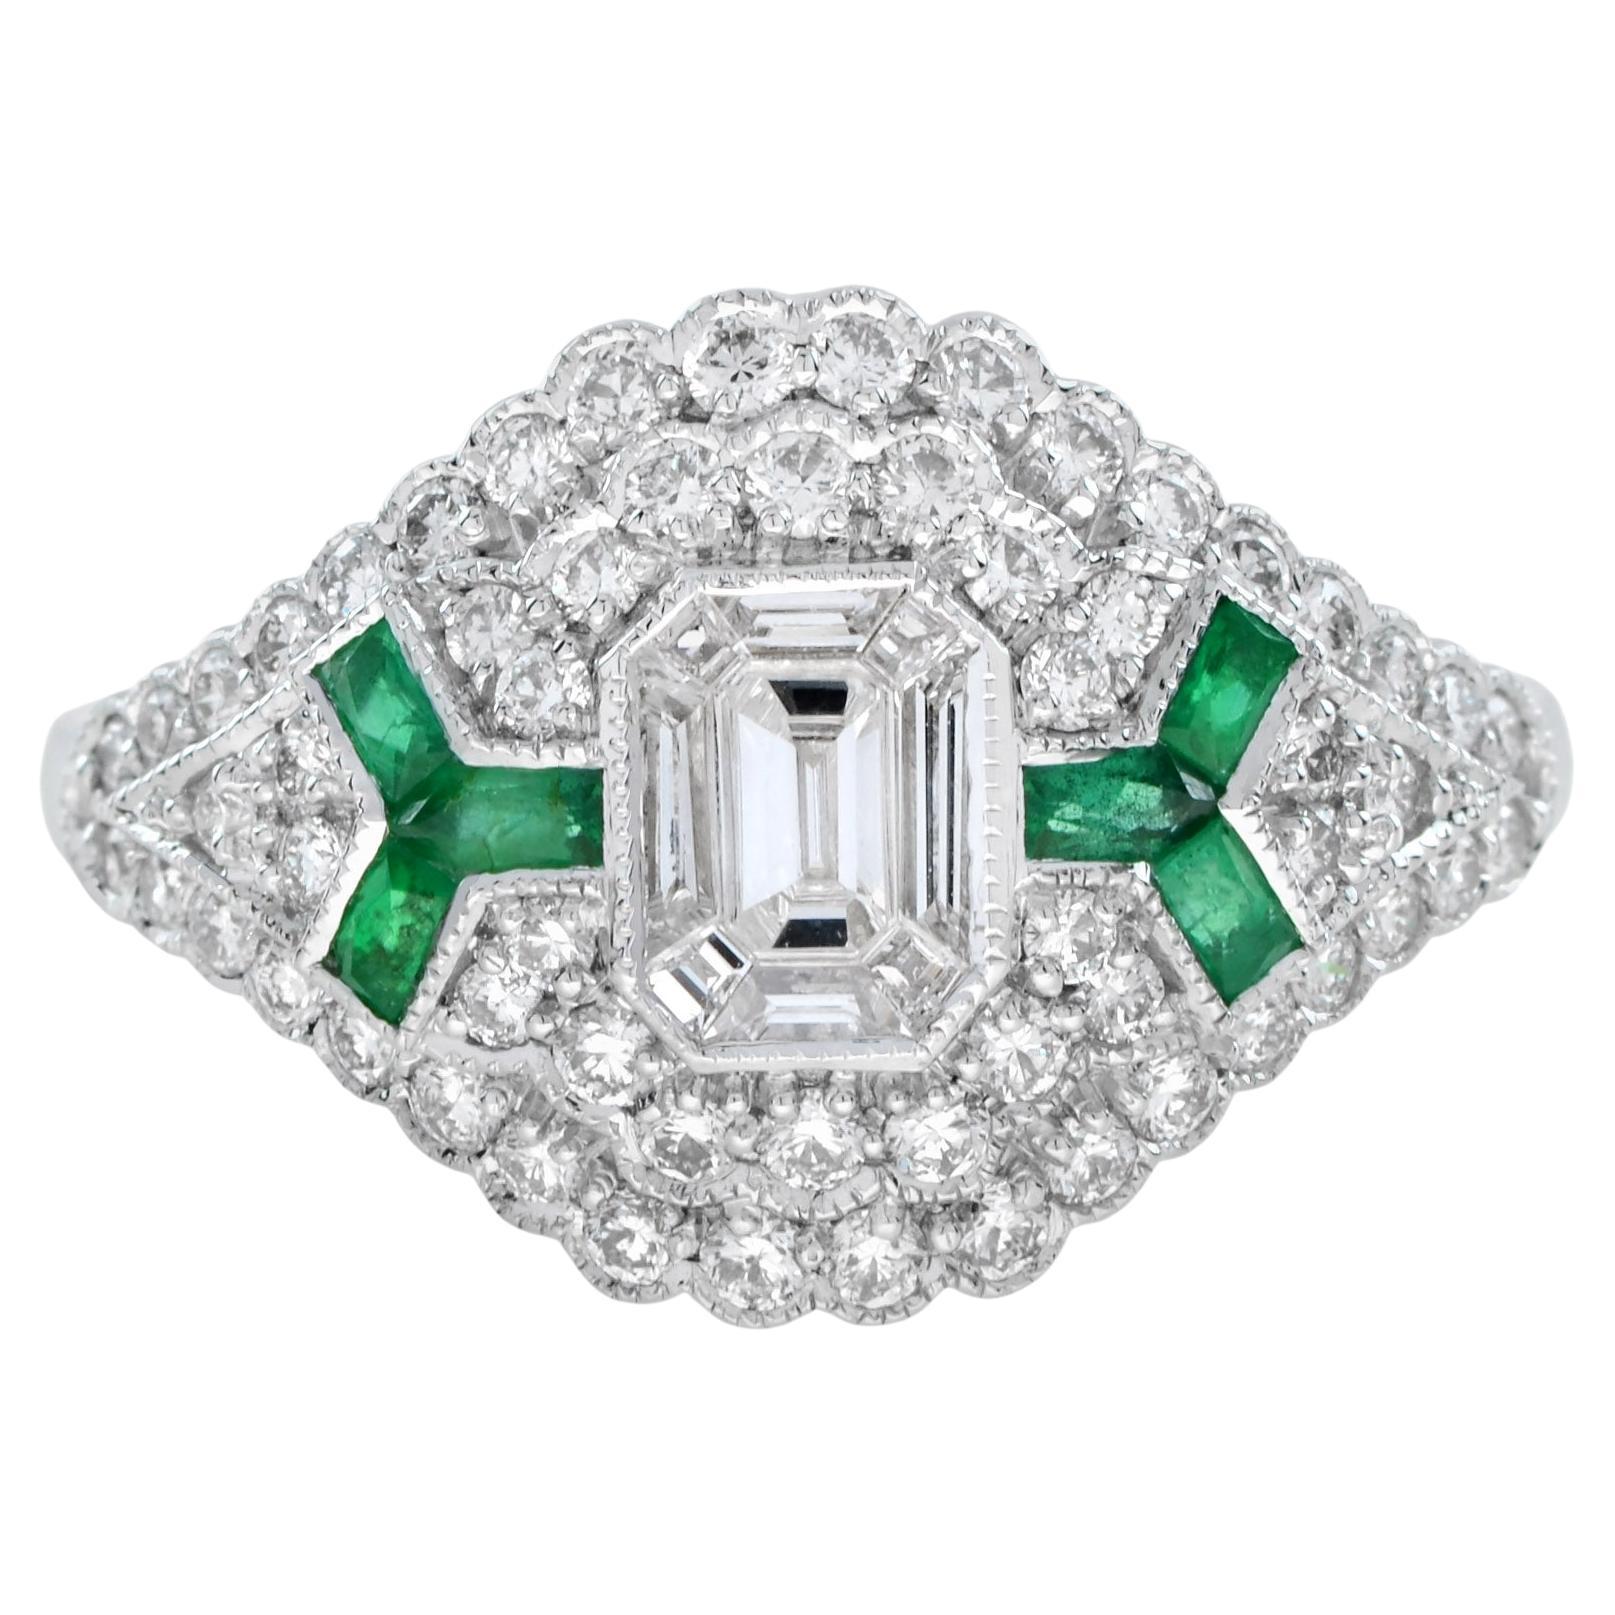 For Sale:  Emerald Cut Diamond and Emerald Art Deco Style Ring in 18K White Gold